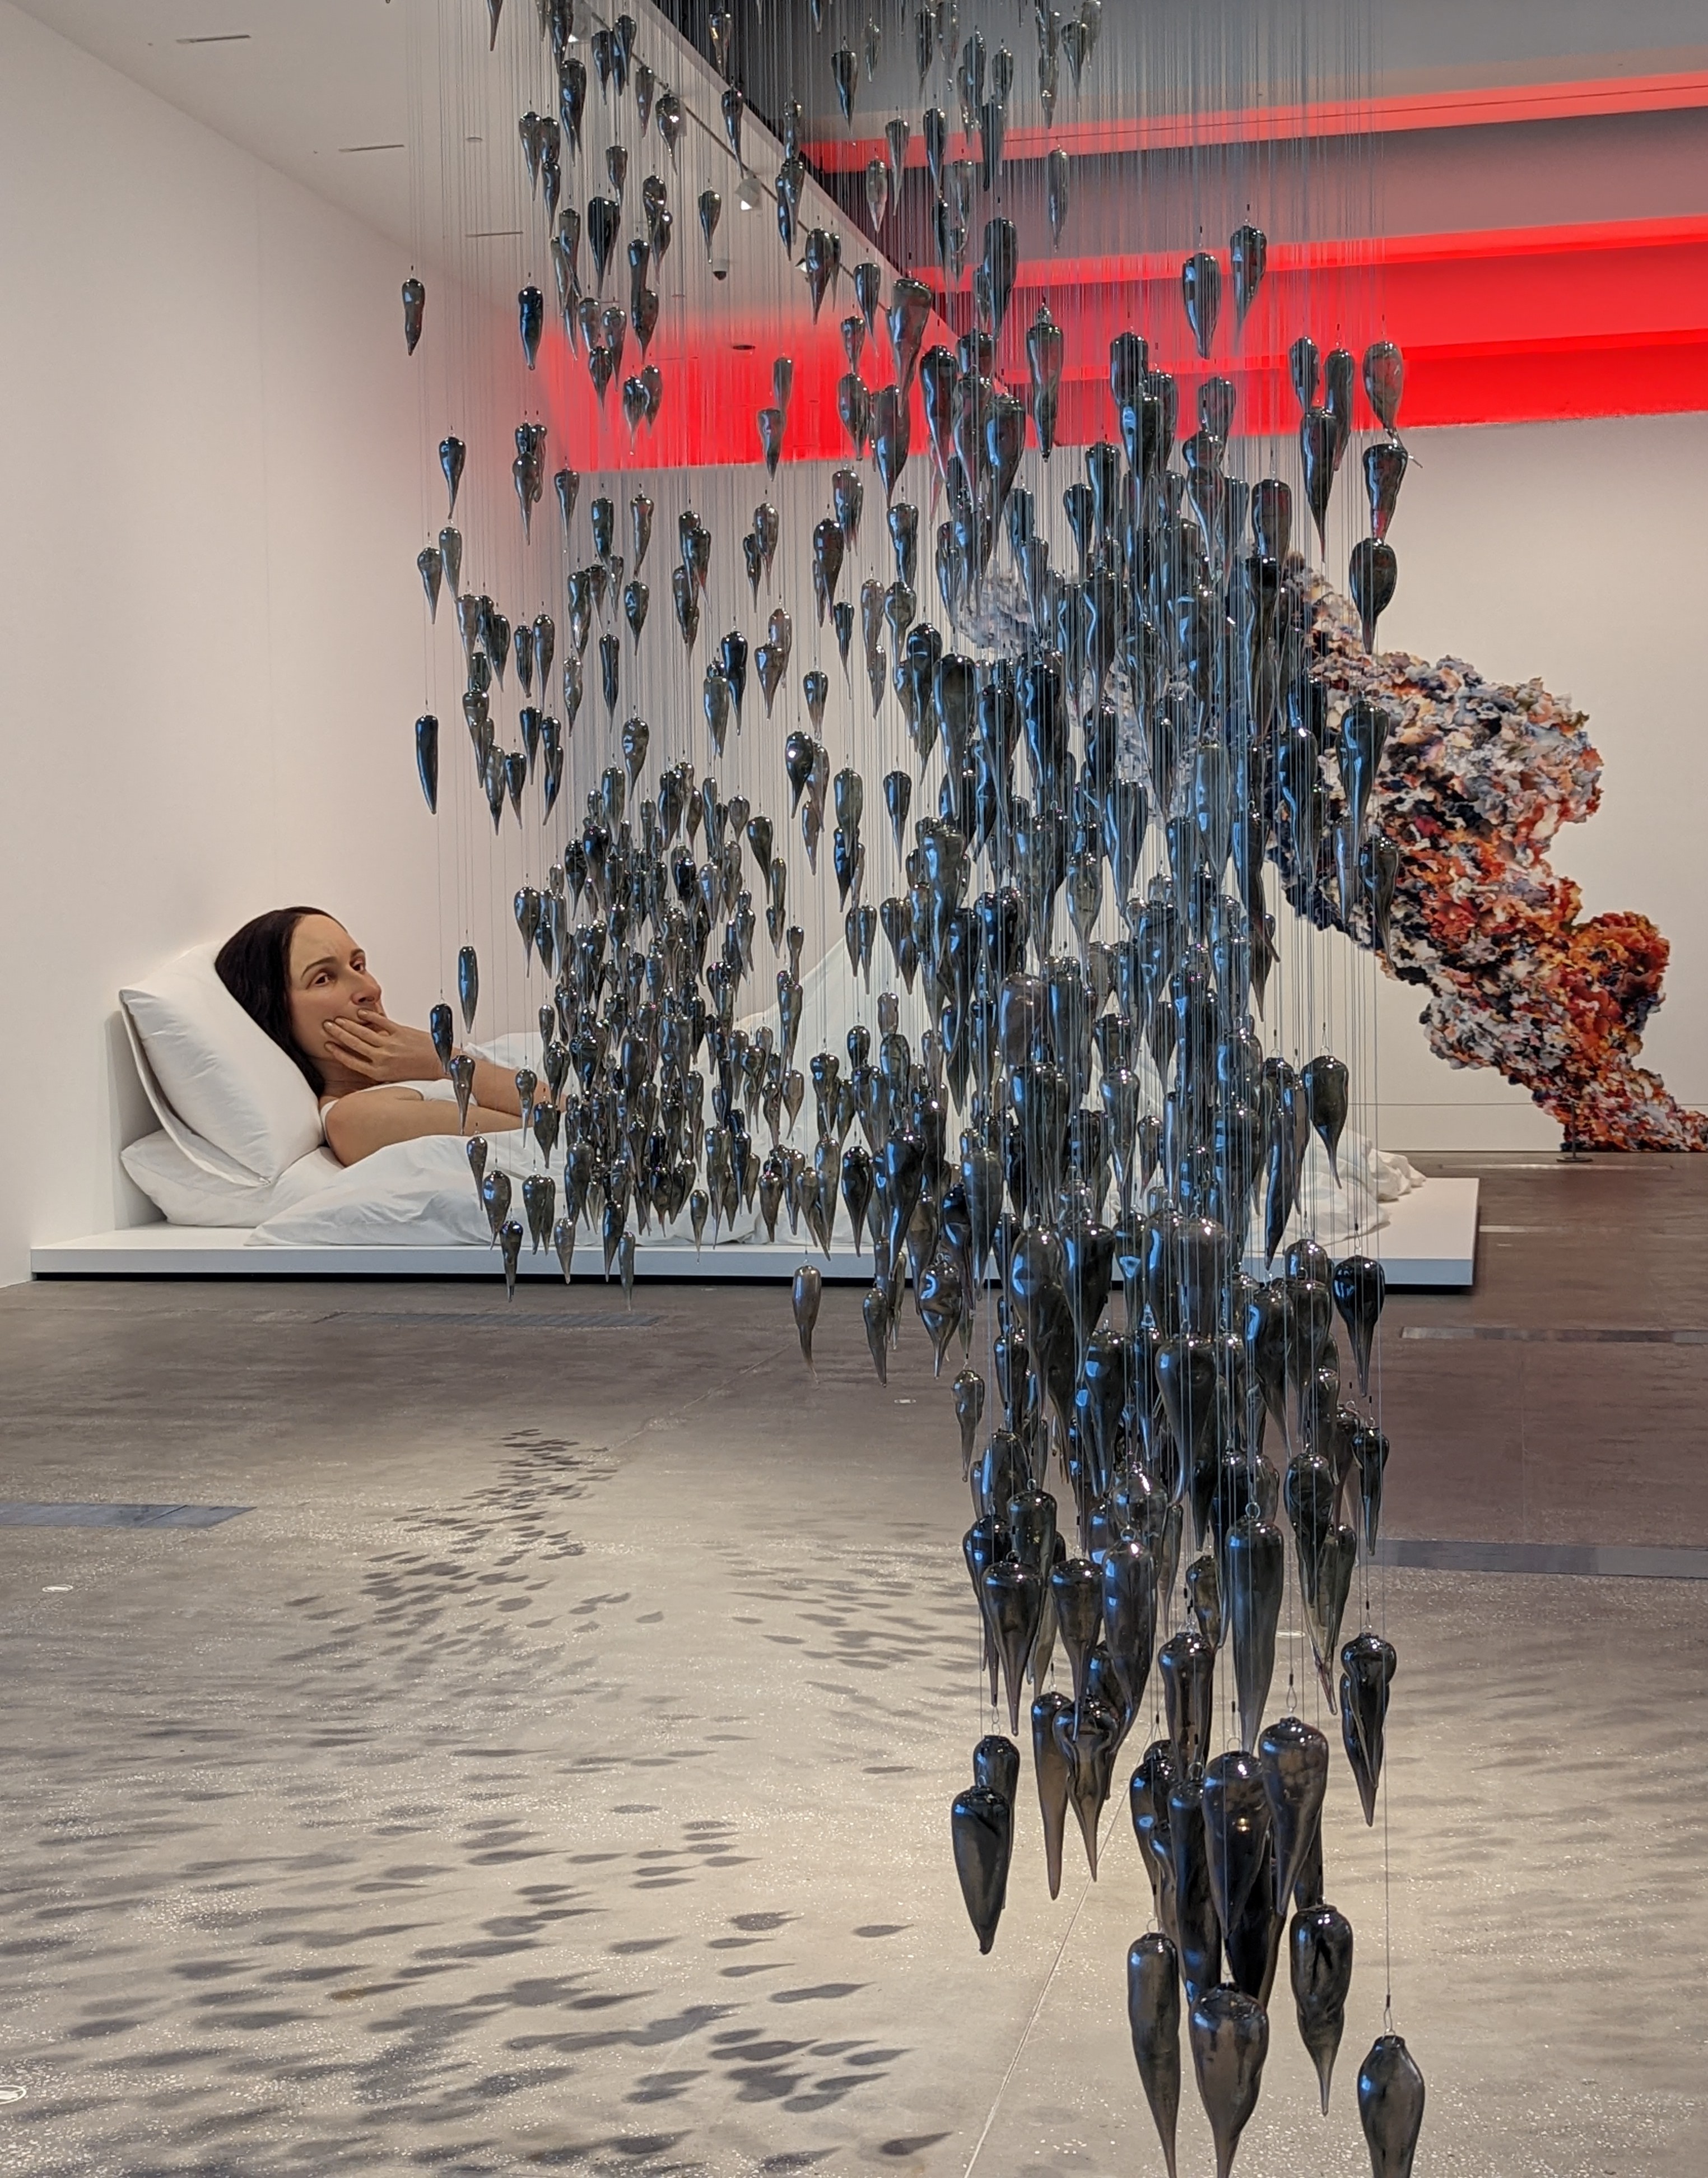 Glass yams hang from a gallery ceiling. Behind it is a large hyperrealistic sculpture of a woman, and a collaged plume of smoke.